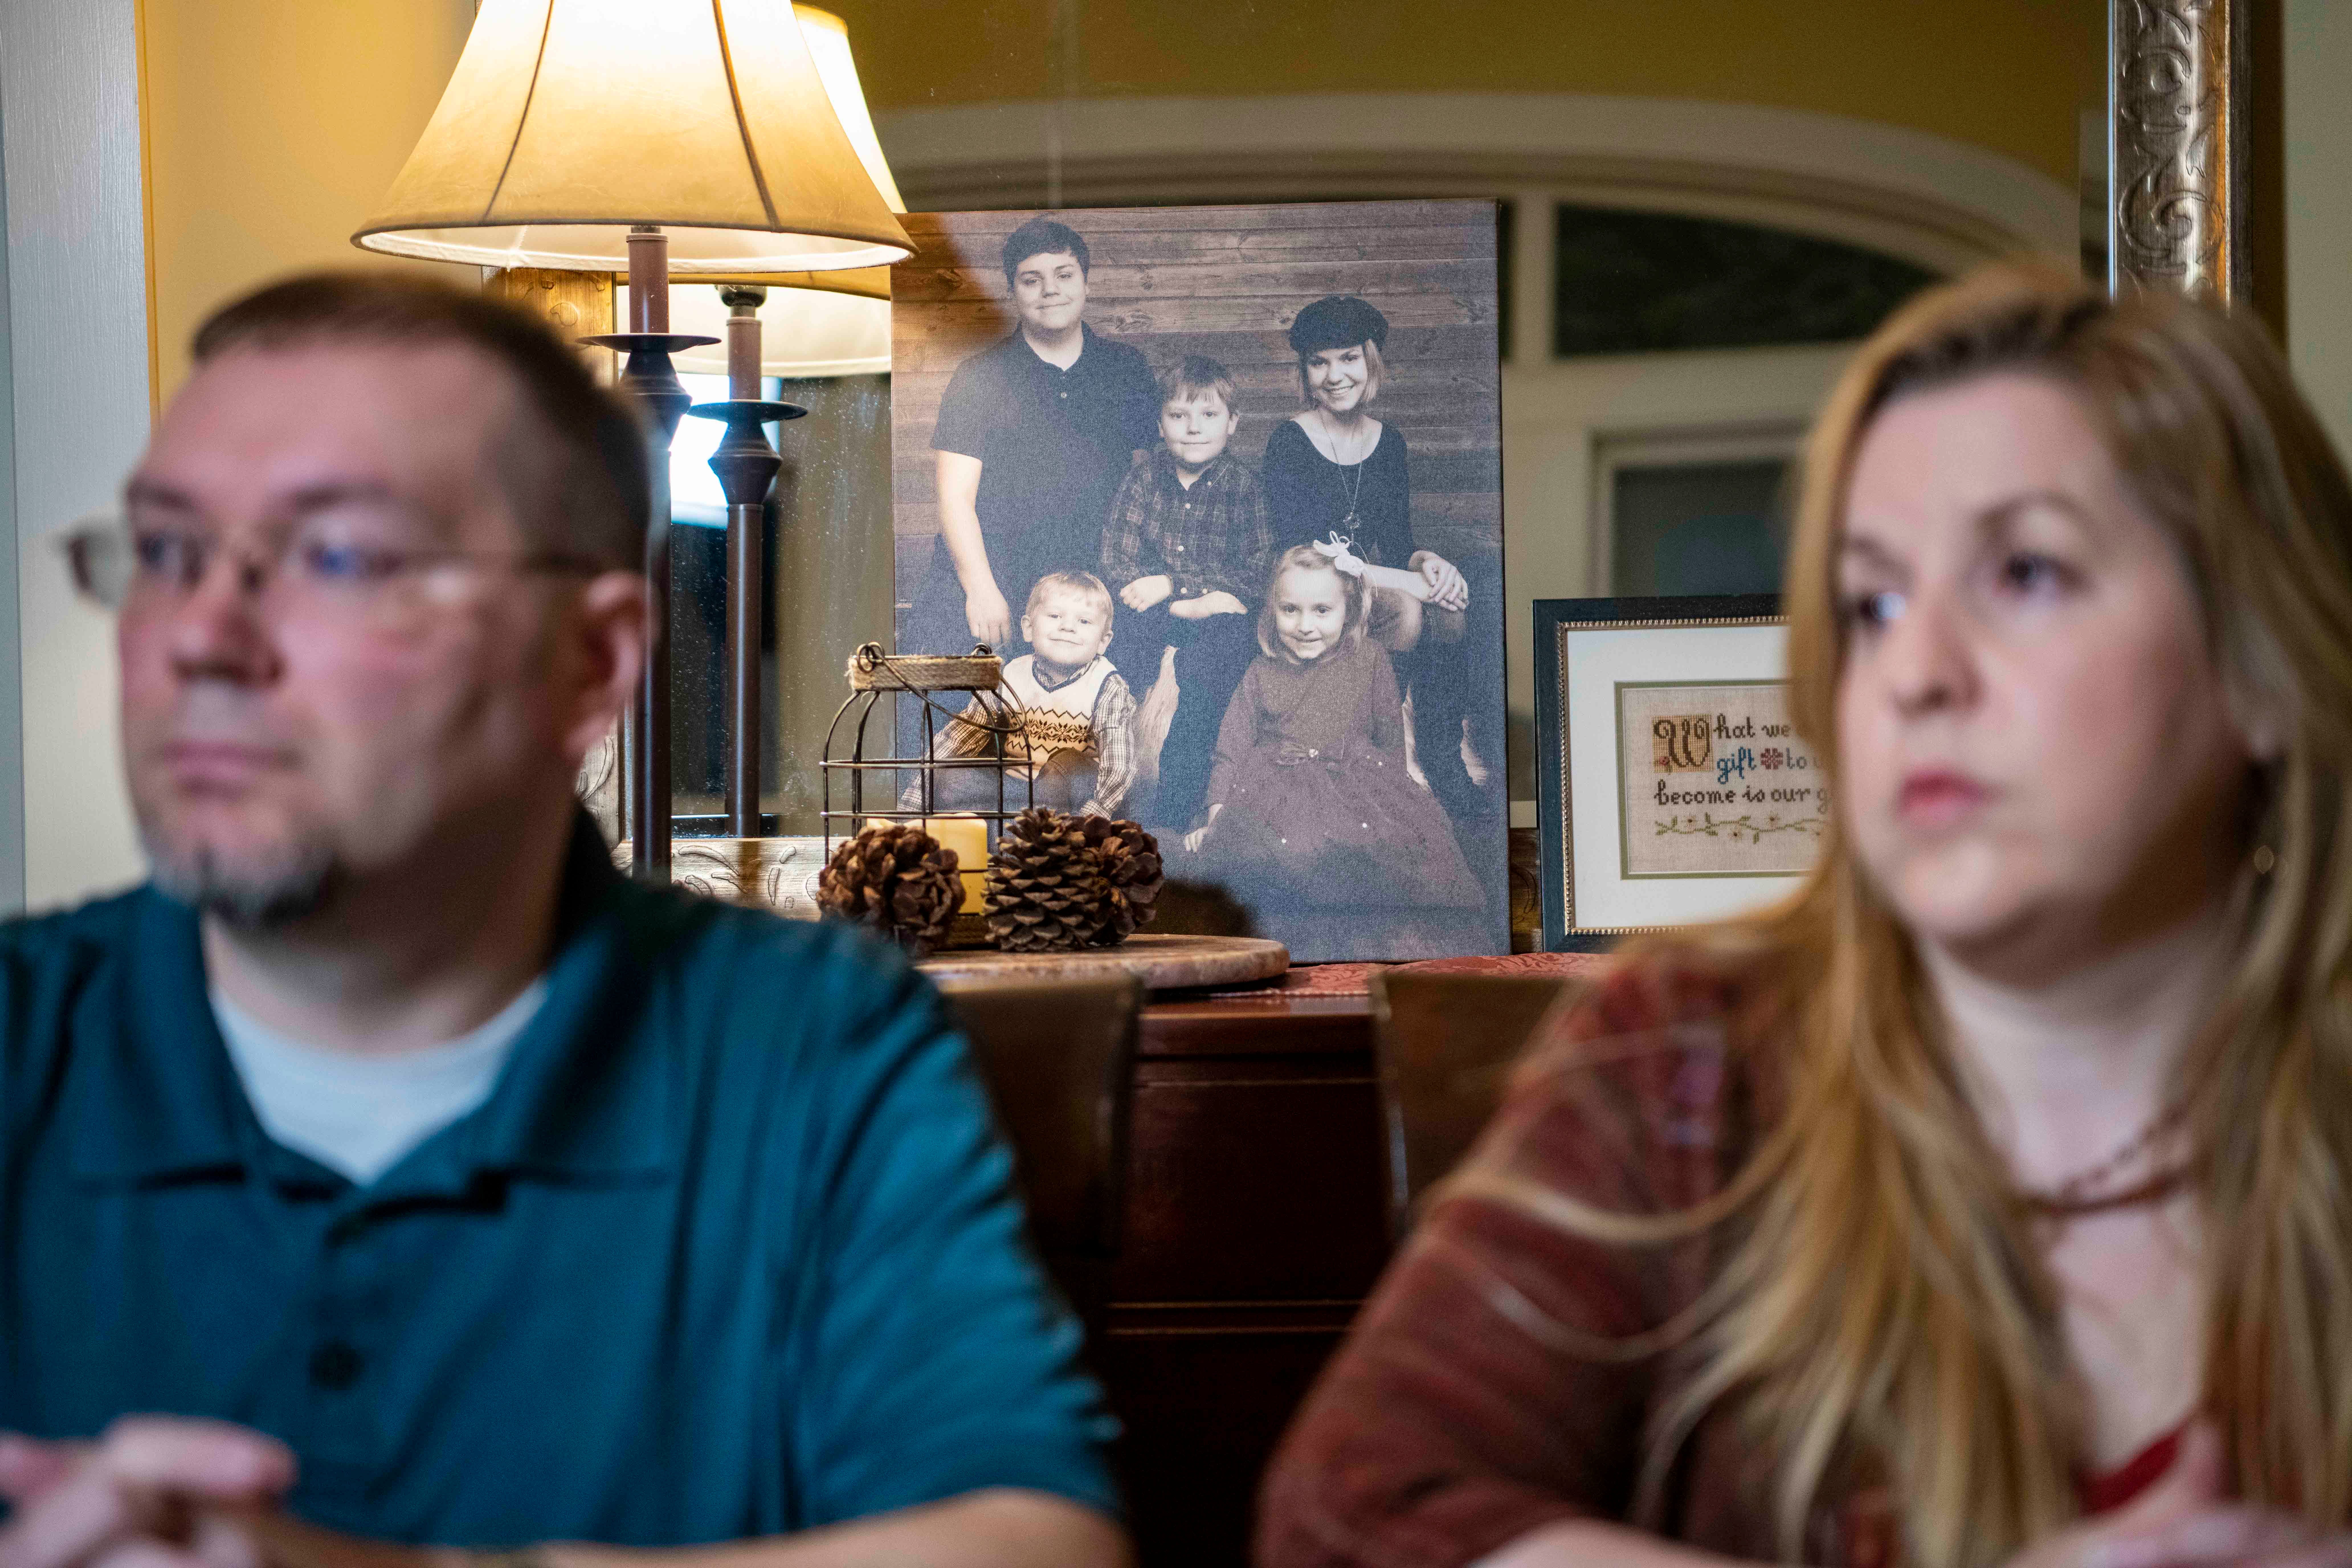 Dominique and Megan Benninger sit in front of a portrait of their five children in their home.